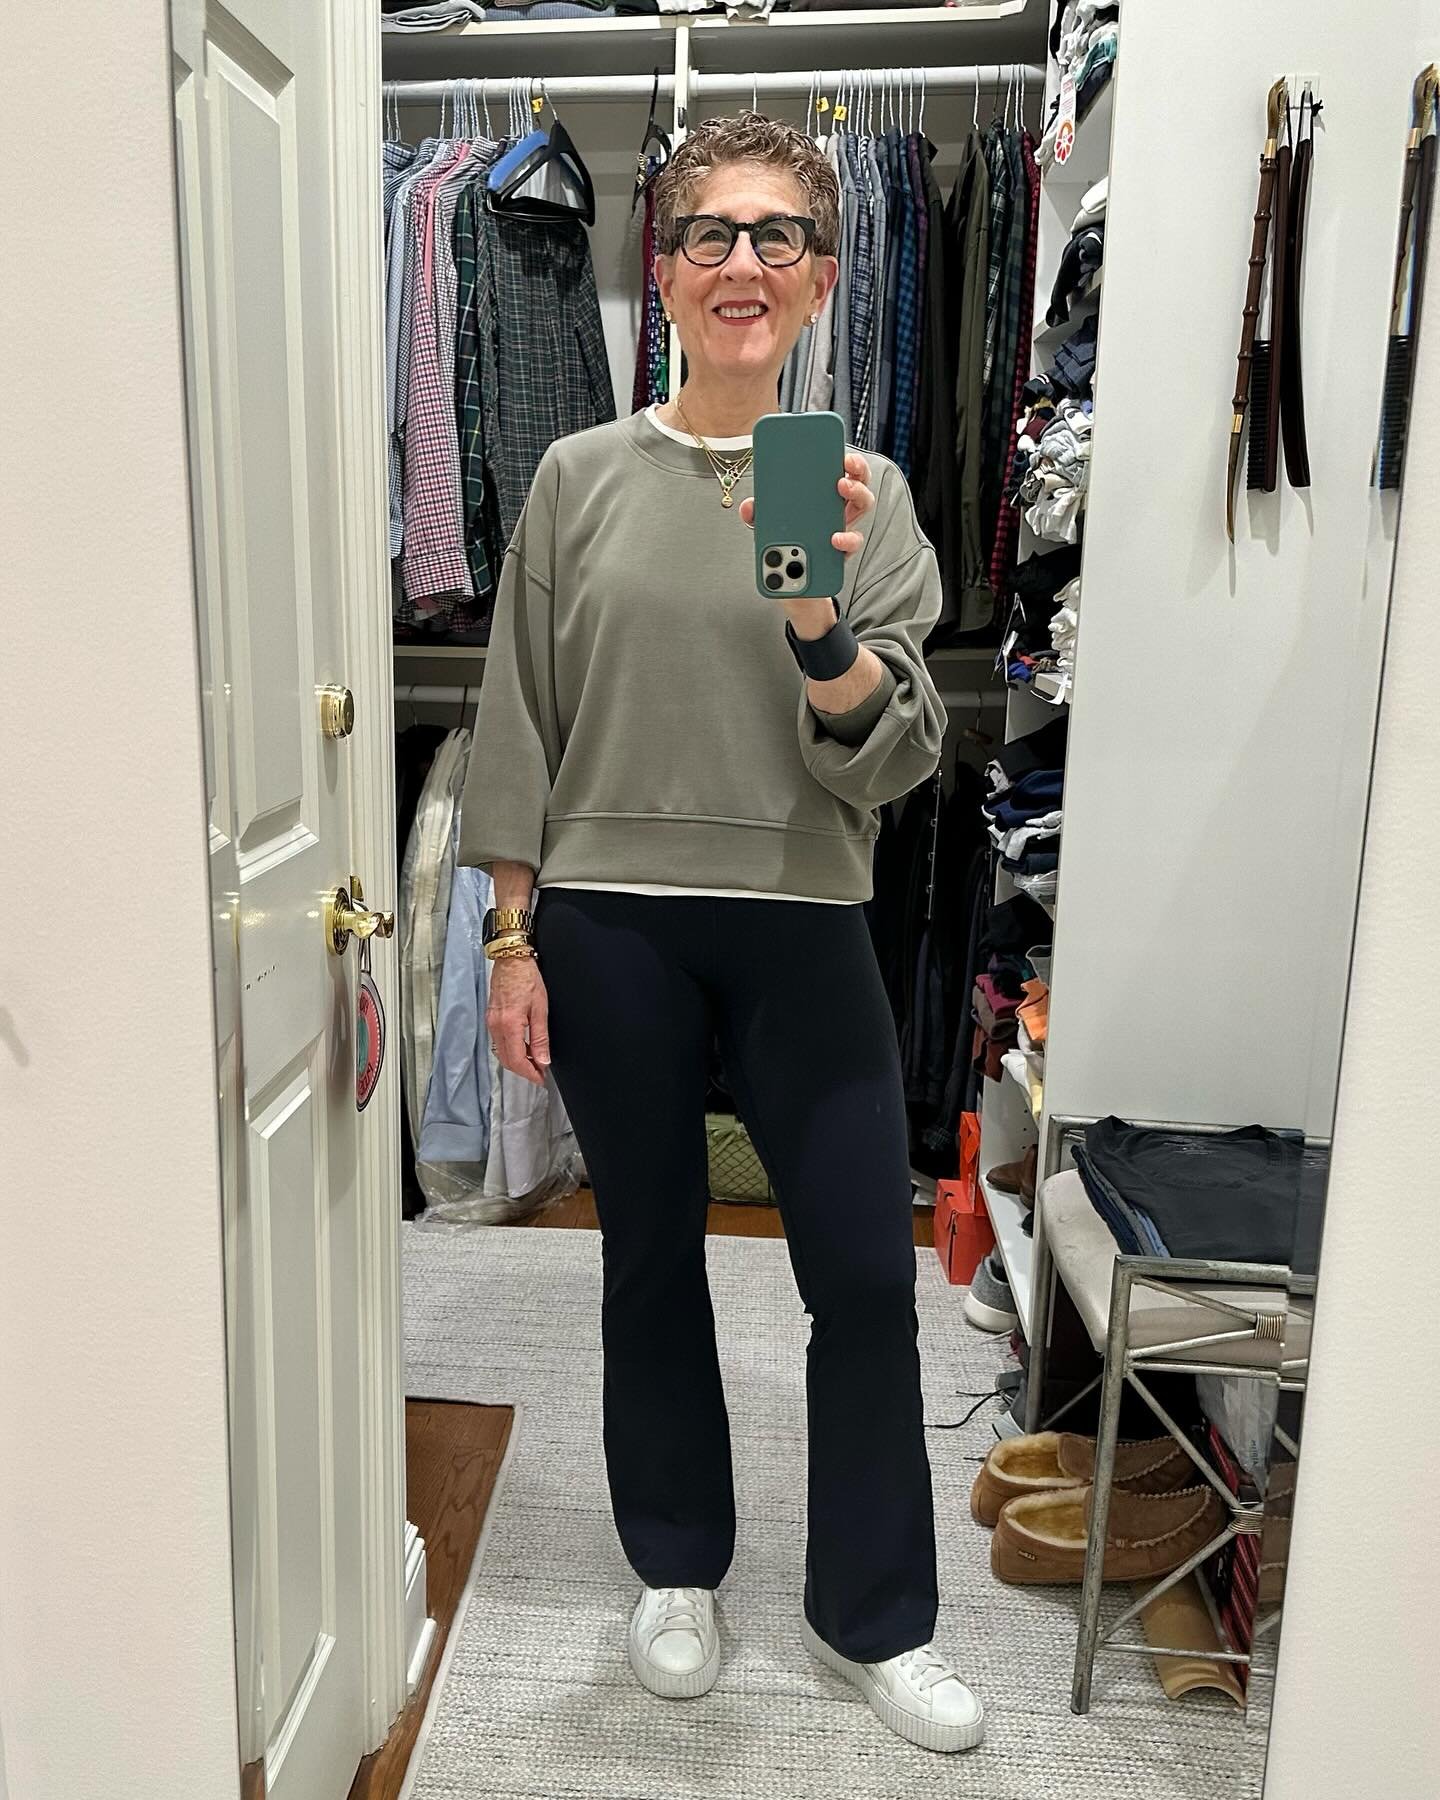 It&rsquo;s a PT day today so of course leggings and a sweatshirt are called for. But you know me. I have to find a way to elevate! So the first step was to choose a color palette for a sunny spring day. I chose olive green/white/navy blue The sweatsh